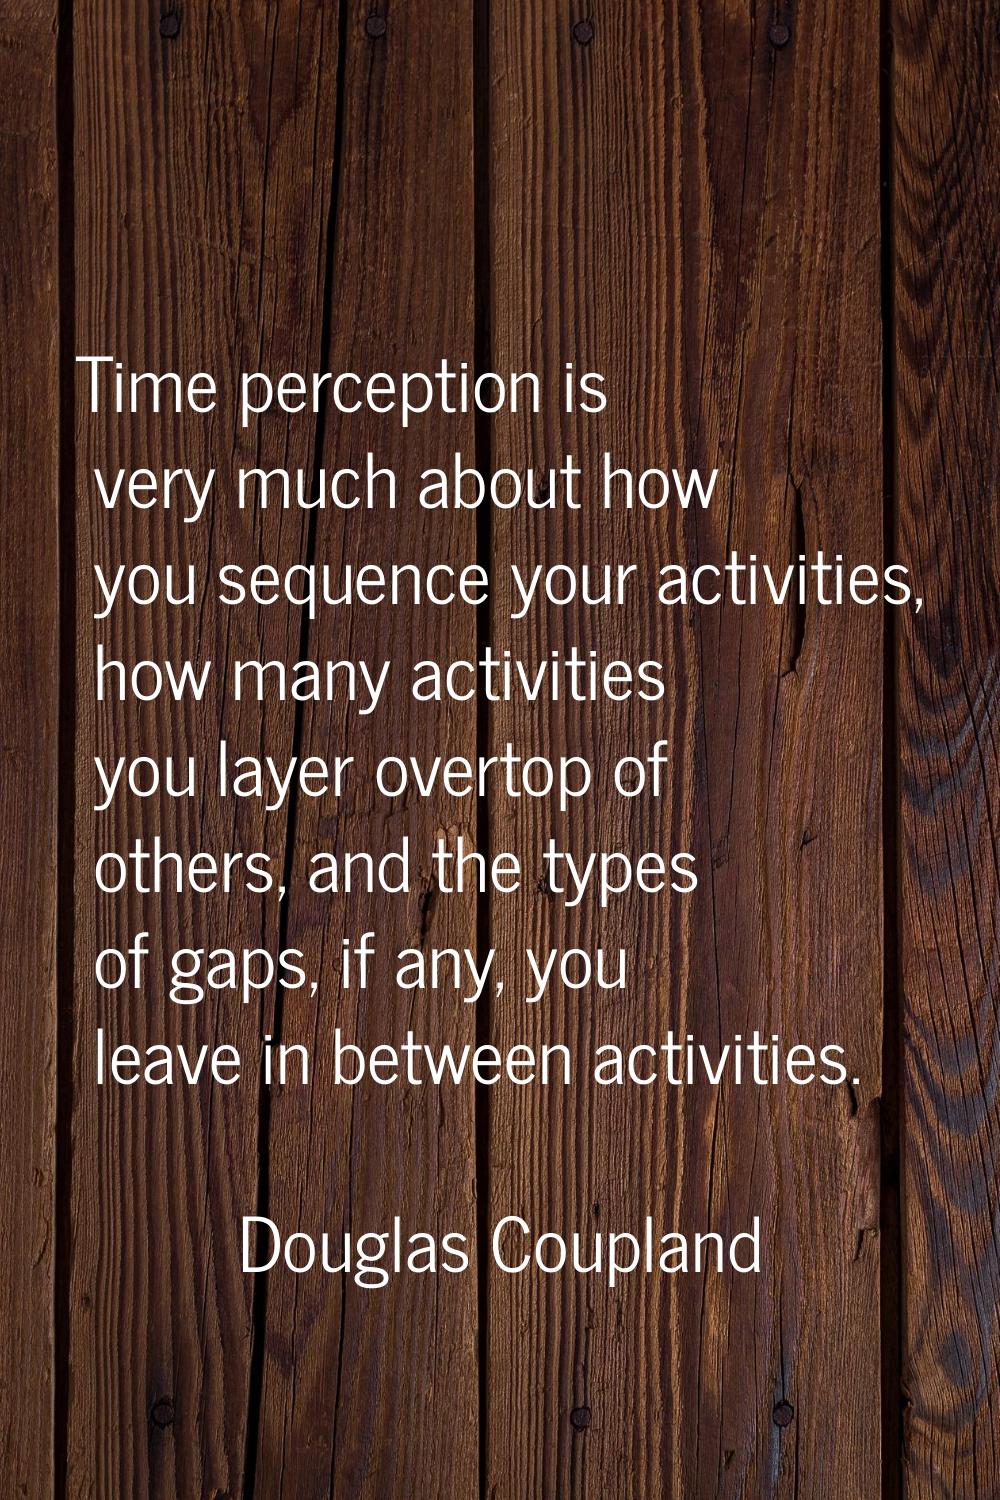 Time perception is very much about how you sequence your activities, how many activities you layer 